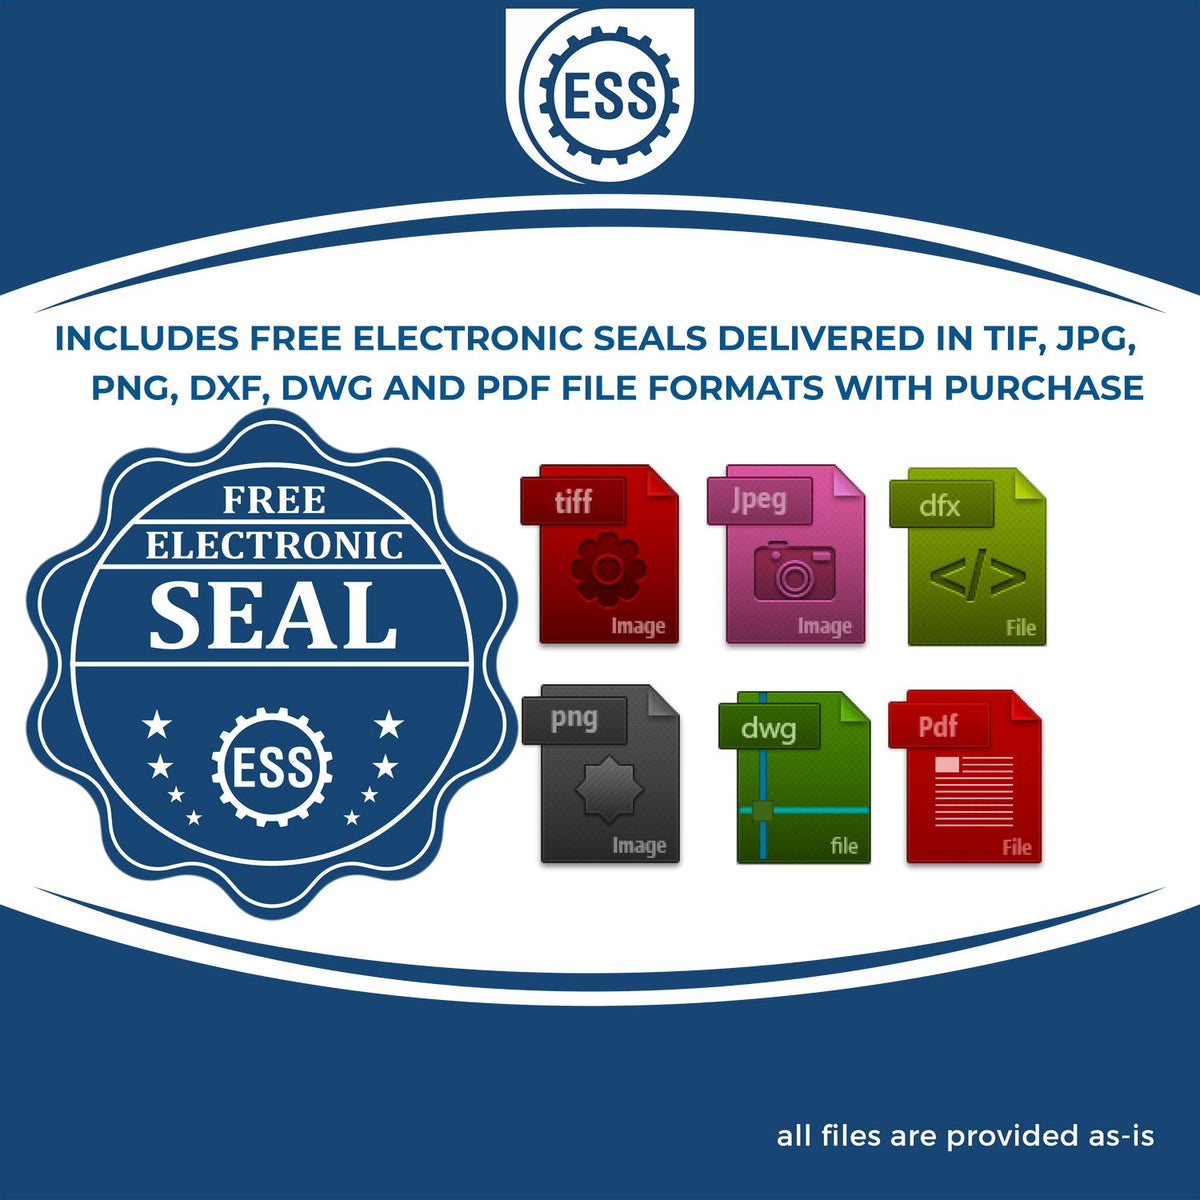 An infographic for the free electronic seal for the State of Pennsylvania Extended Long Reach Geologist Seal illustrating the different file type icons such as DXF, DWG, TIF, JPG and PNG.